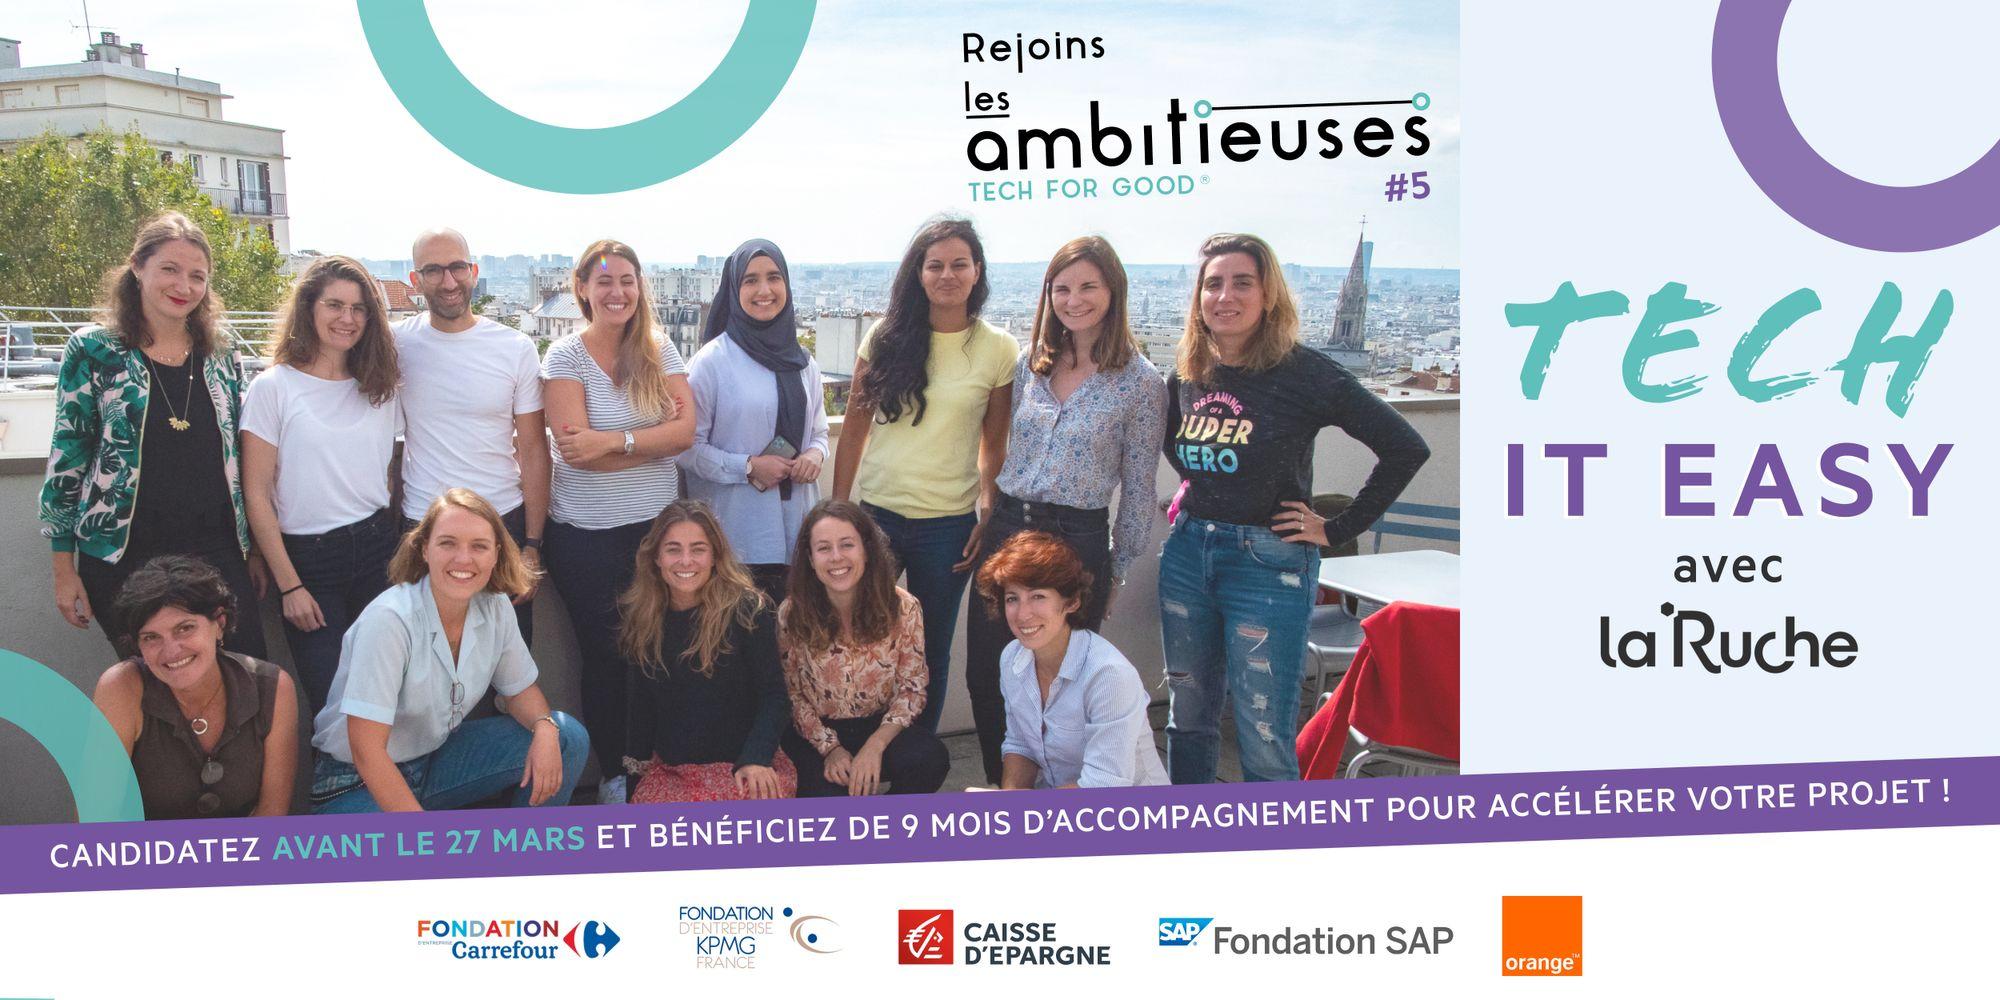 Les Ambitieuses Tech For Good